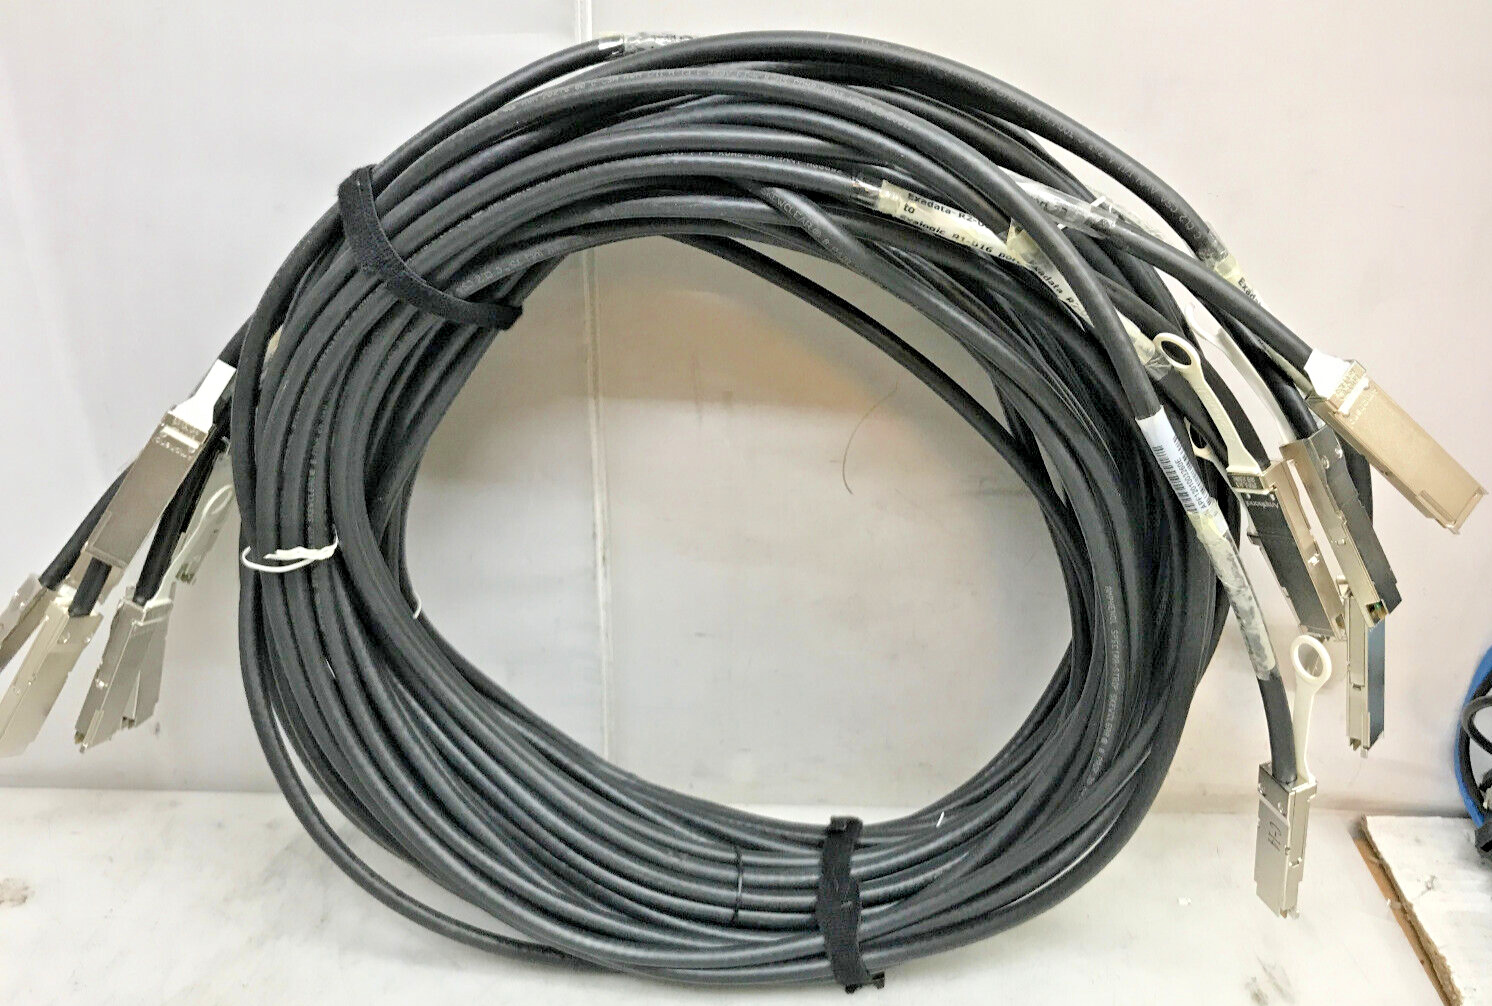 Lot of 8 Sun 530-4446-01 Infiniband 5M QSFP to QSFP Passive Copper Cable